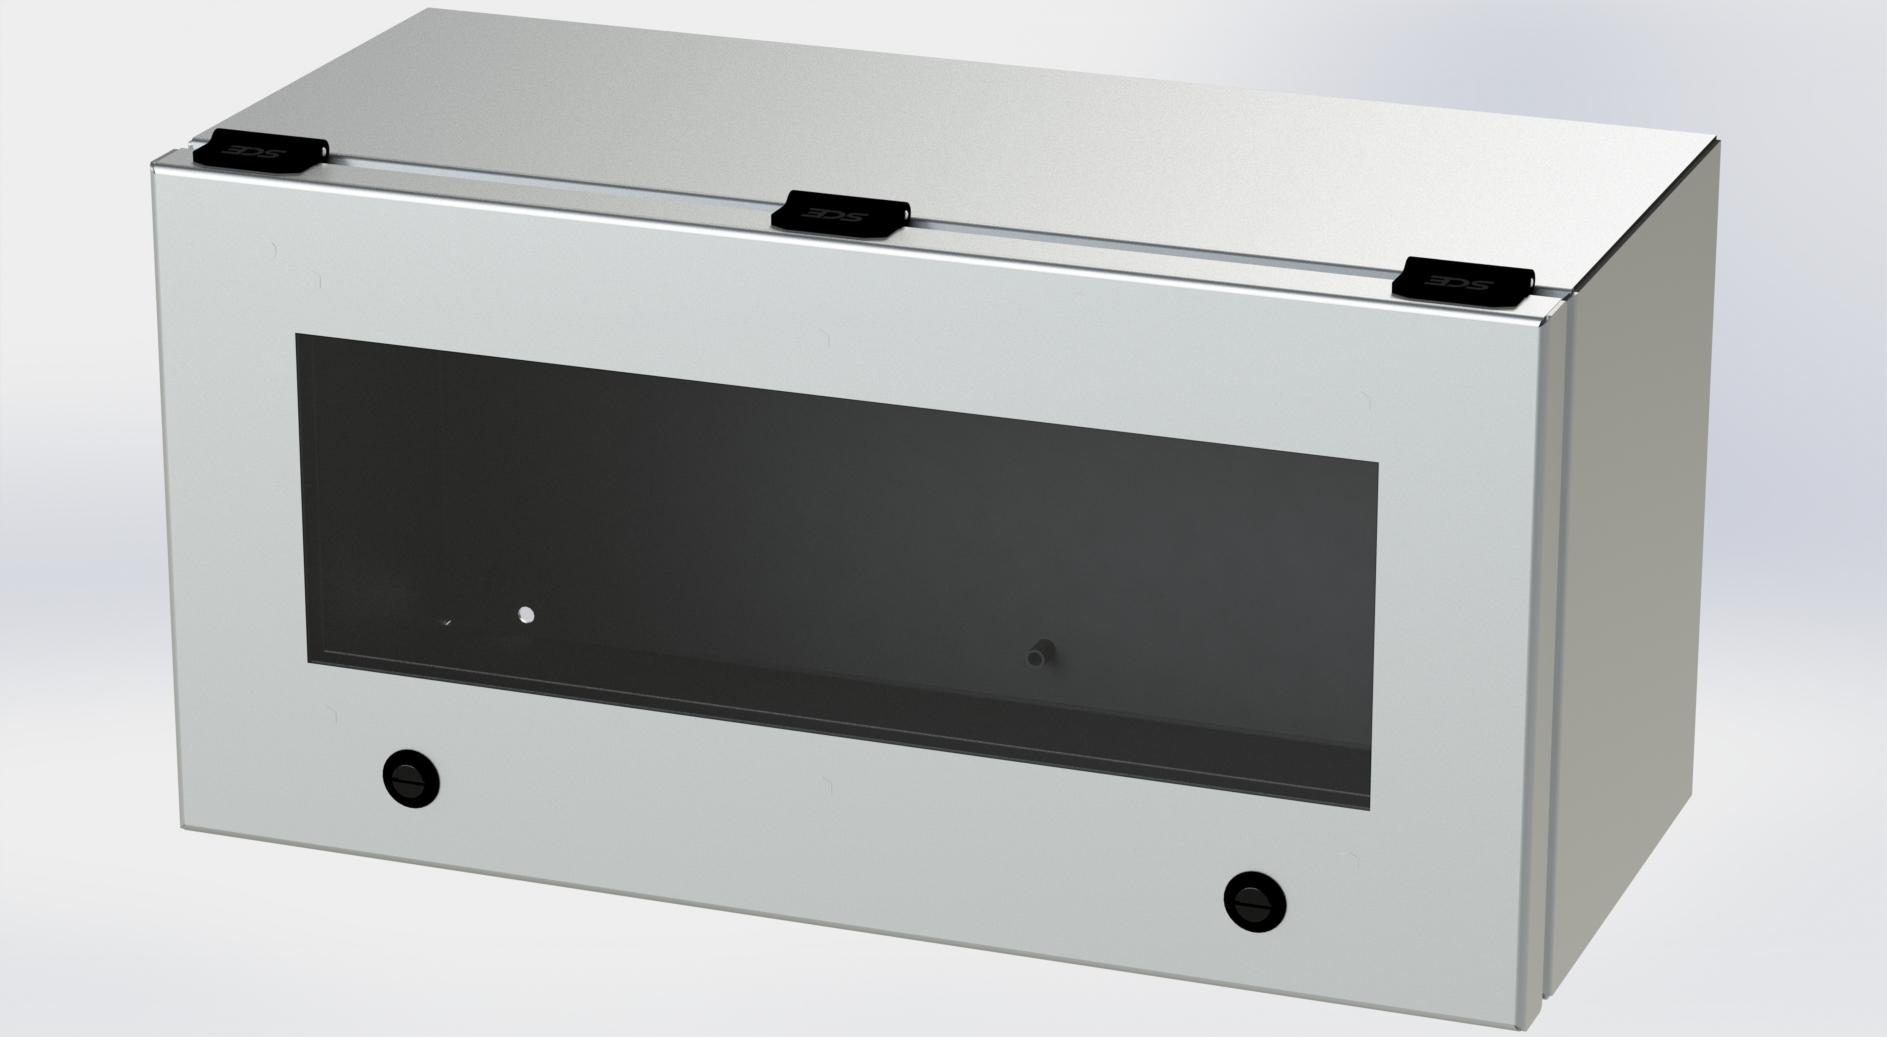 Saginaw Control SCE-L9188ELJWSS S.S. ELJ Trough Window Enclosure, Height:9.00", Width:18.00", Depth:8.00", #4 brushed finish on all exterior surfaces. Optional sub-panels are powder coated white.